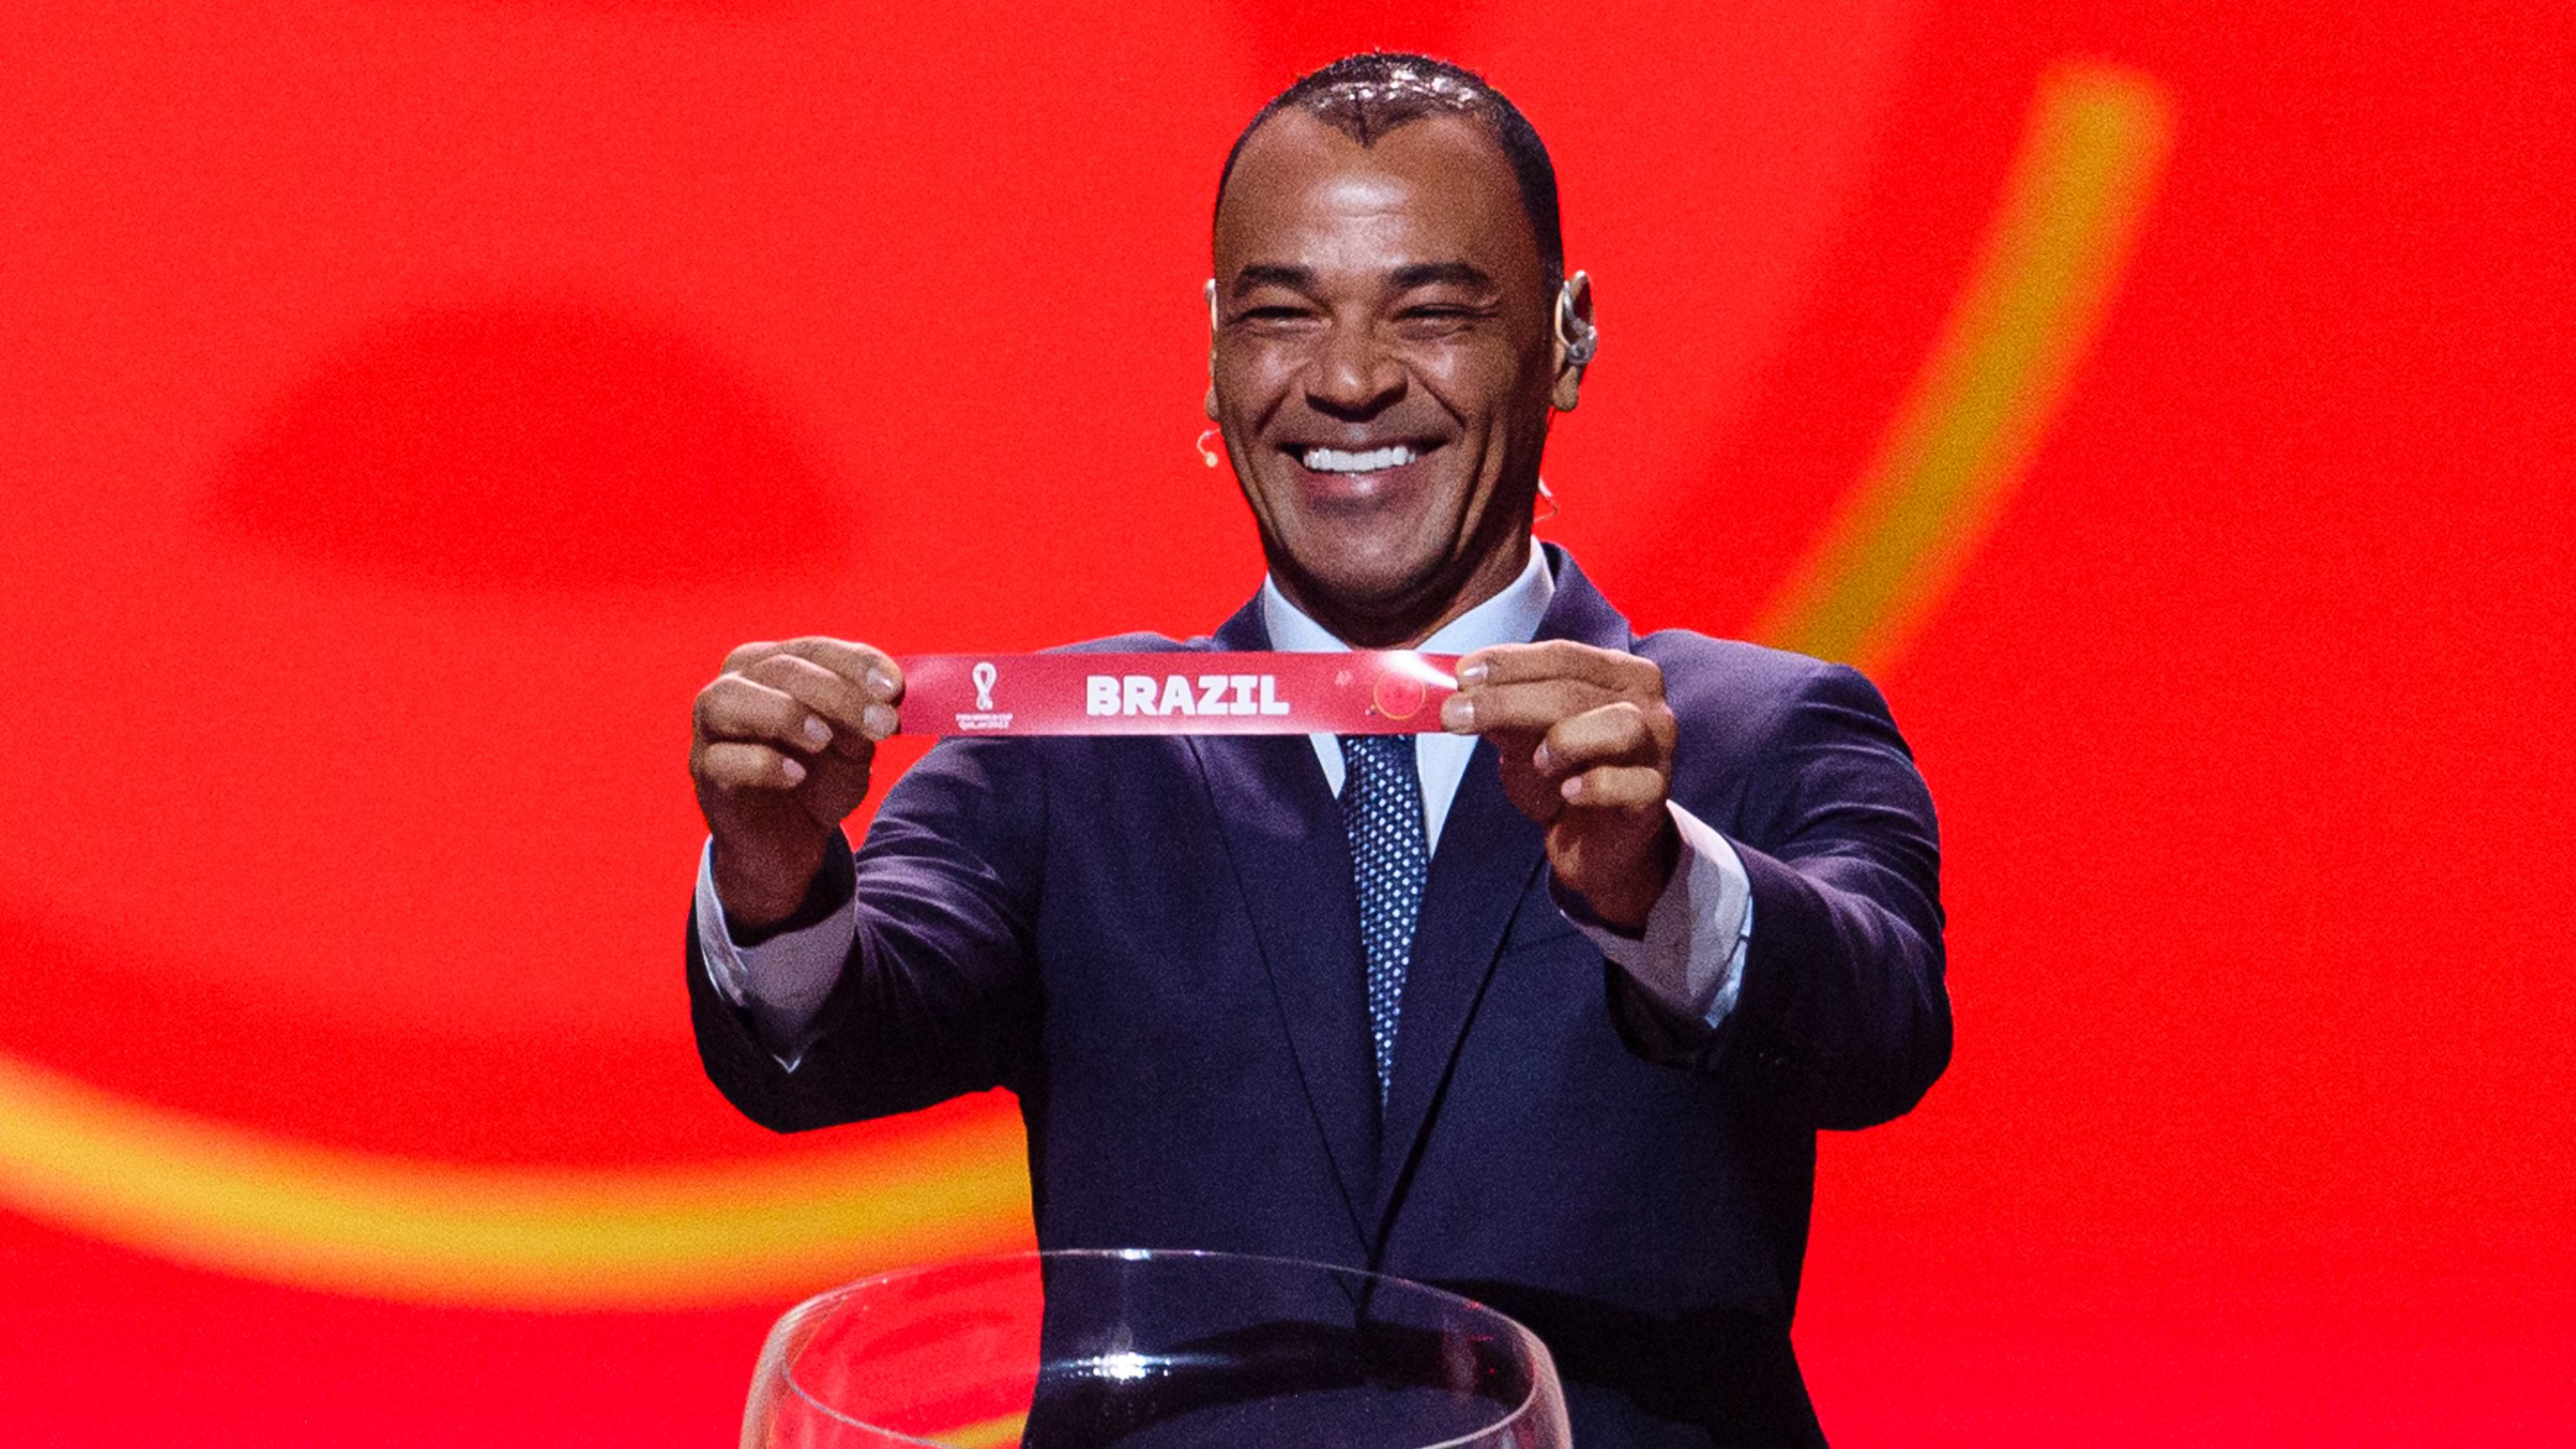 What is the 2022 World Cup 'Group of Death'?